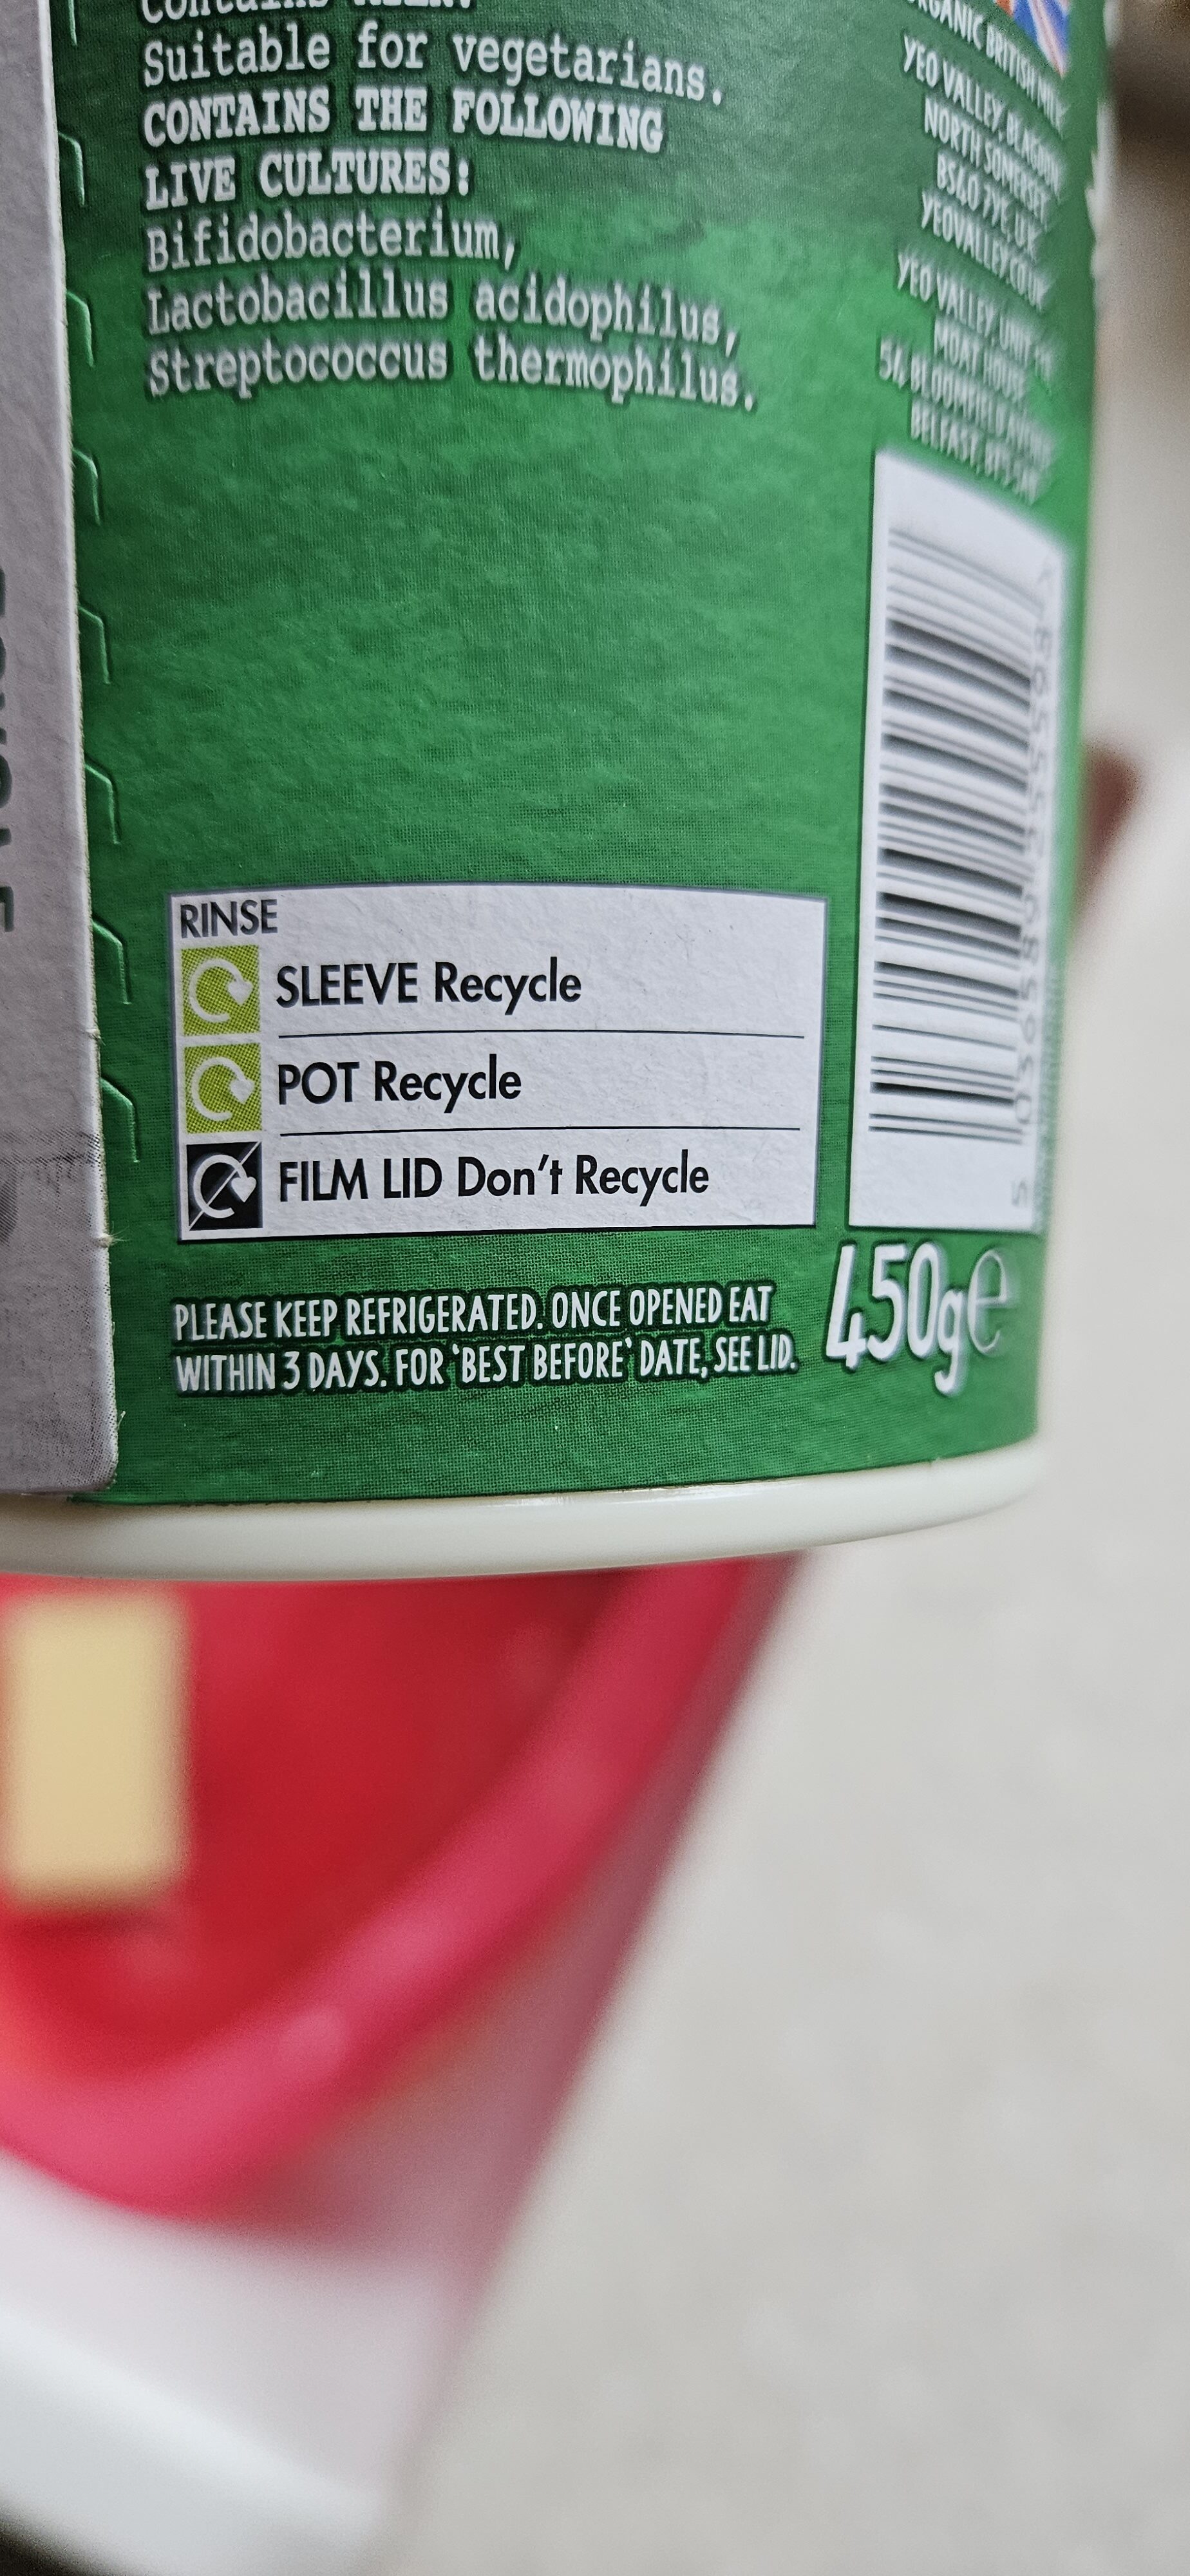 Organic Natural Yoghurt - Recycling instructions and/or packaging information